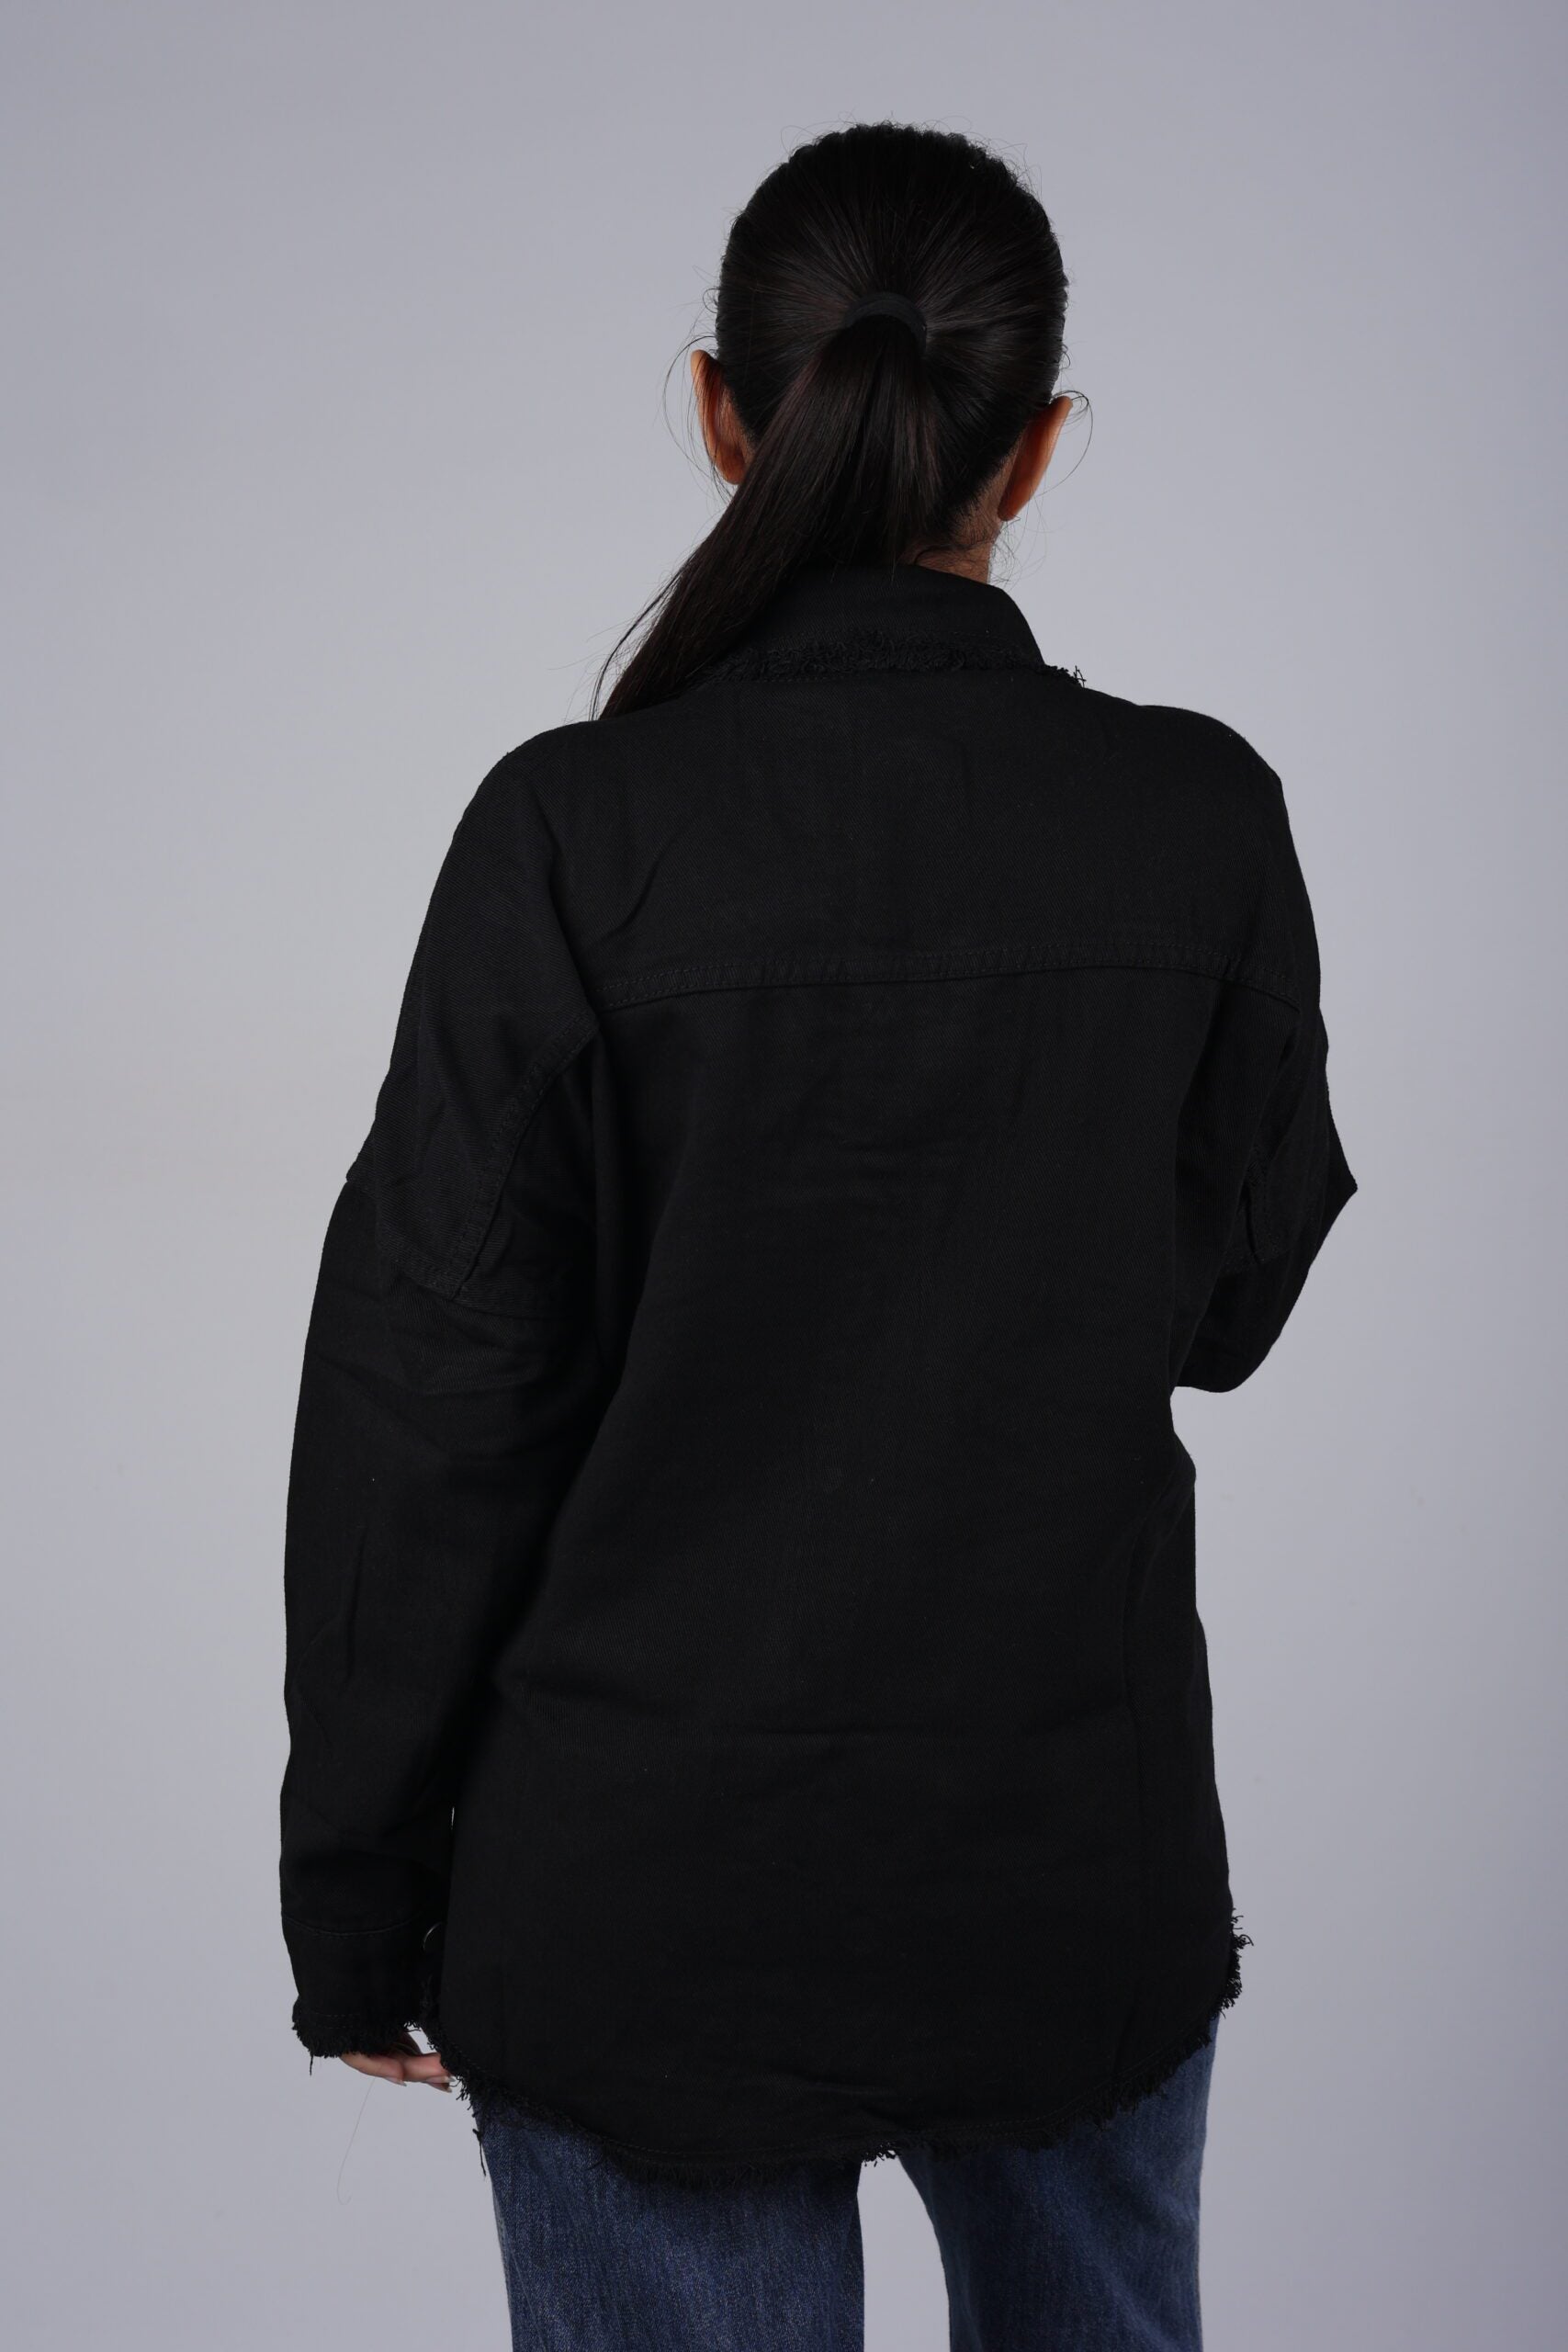 Denim Loose fit Shirt (Black) Elevate Your Casual Style with Timeless Denim Comfort!